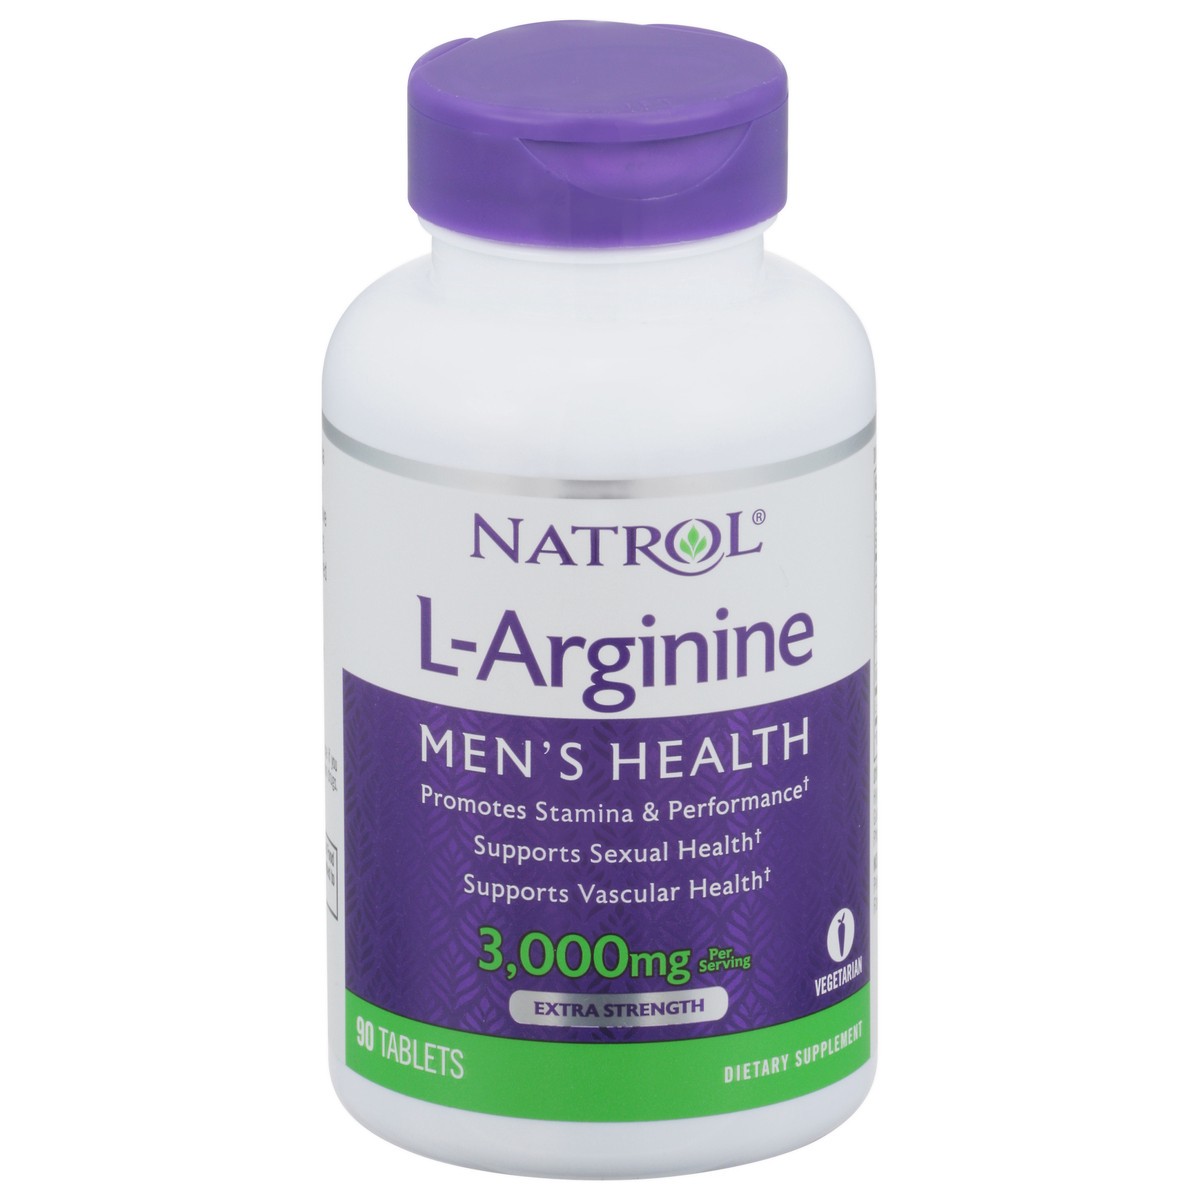 slide 4 of 14, Natrol L-Arginine Tablets, Dietary Supplement Promotes Stamina and Performance, Supports Vascular Health, Contains Nitric Oxide with B Vitamin Complex, Amino Acid, Extra Strength, 3,000mg, 90 Count, 90 ct